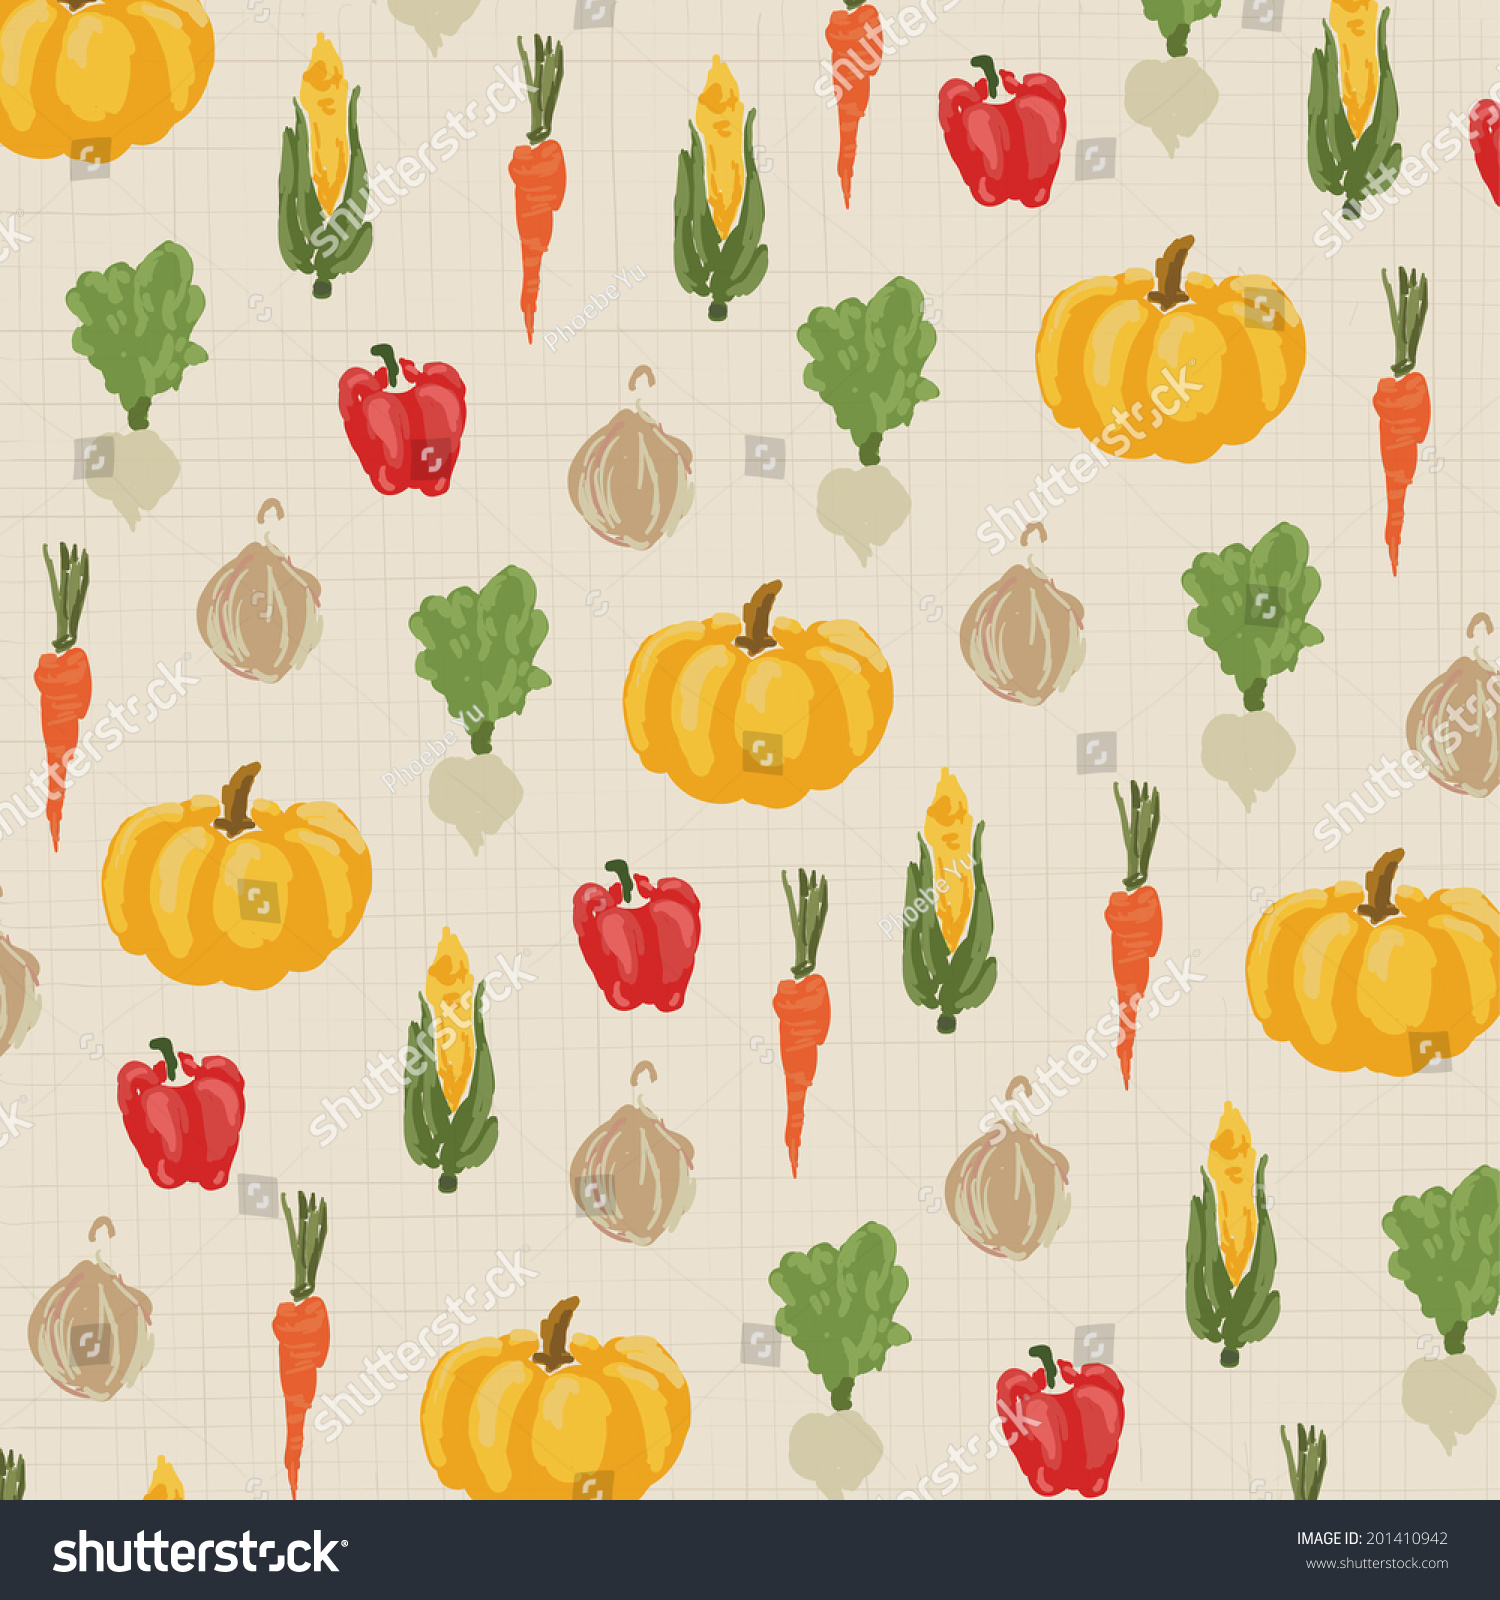 Background of abstract vegetable.  It is a background image of abstract vegetable pattern in vintage style.   #201410942